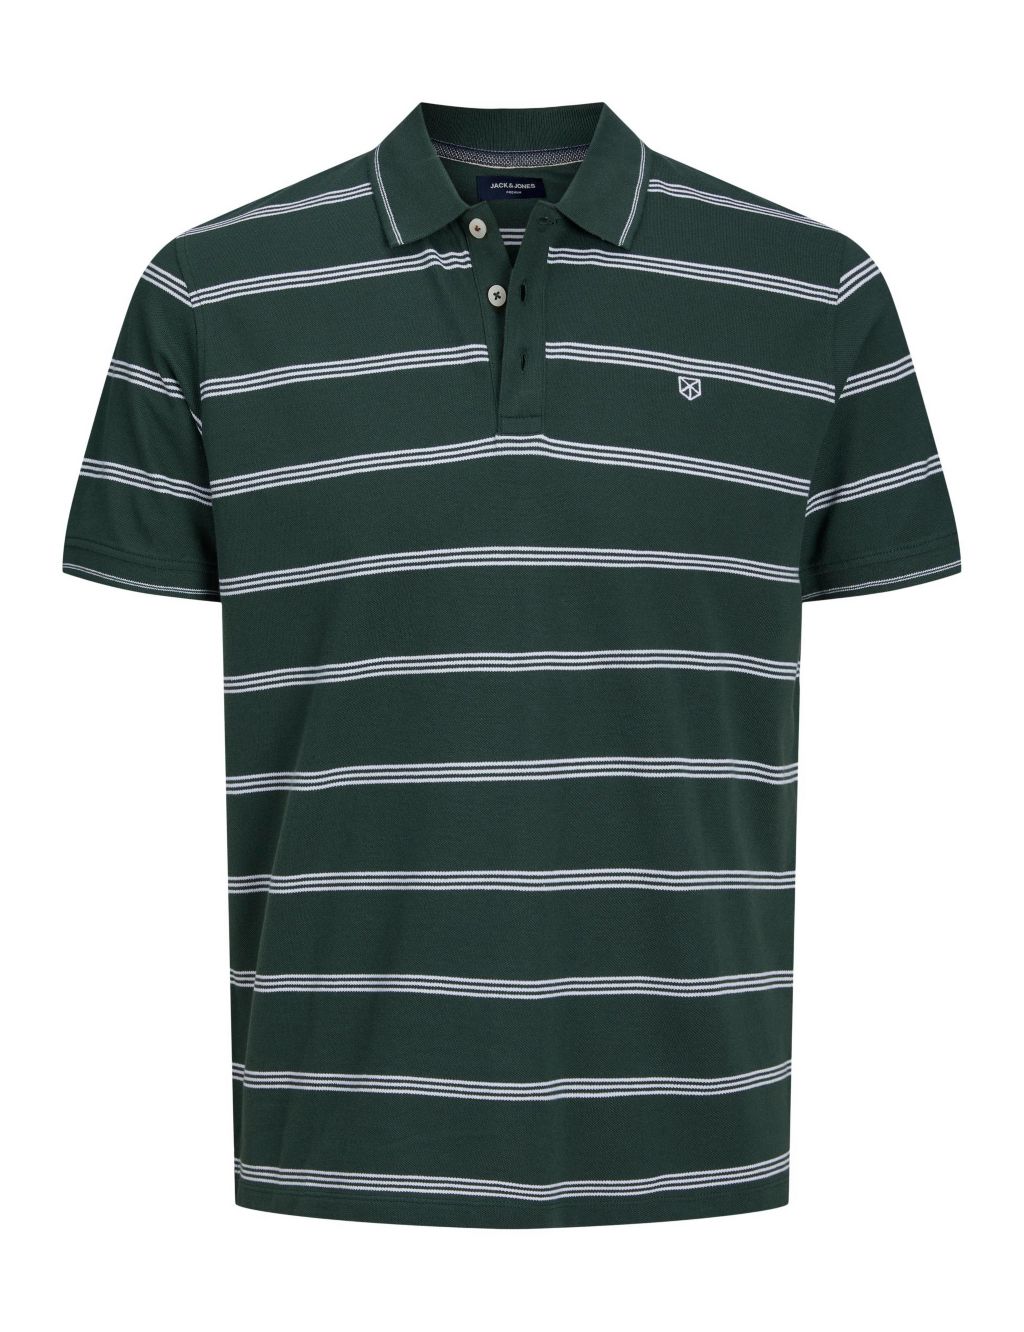 Pure Cotton Striped Tipped Polo Shirt image 2